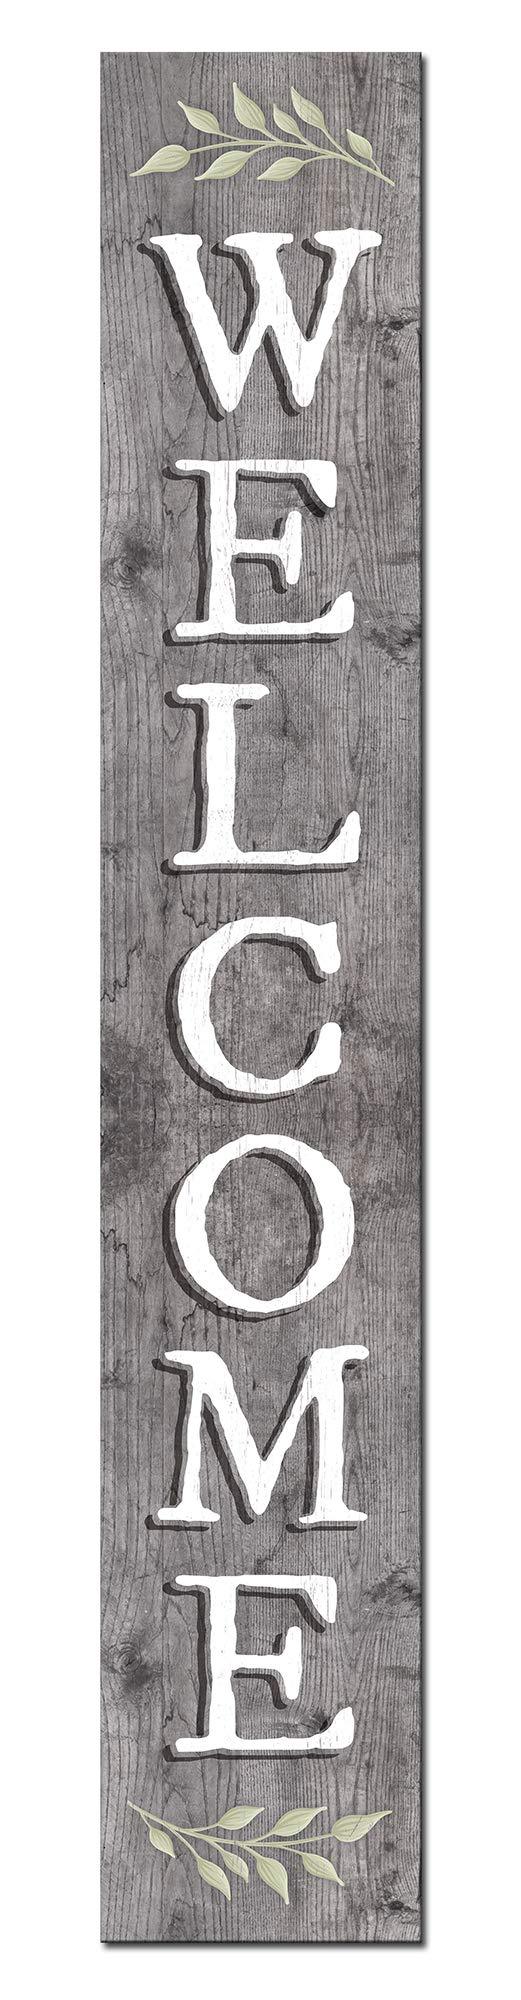 My Word! Welcome Gray w/Sprig Porch Board Sign, multicolor for Front Door, Porch, Yard, or Wall - Indoor Outdoor Decorative Spring, Summer, Fall, Winter Rustic Home Decor Sign - 8x46.5" - CookCave